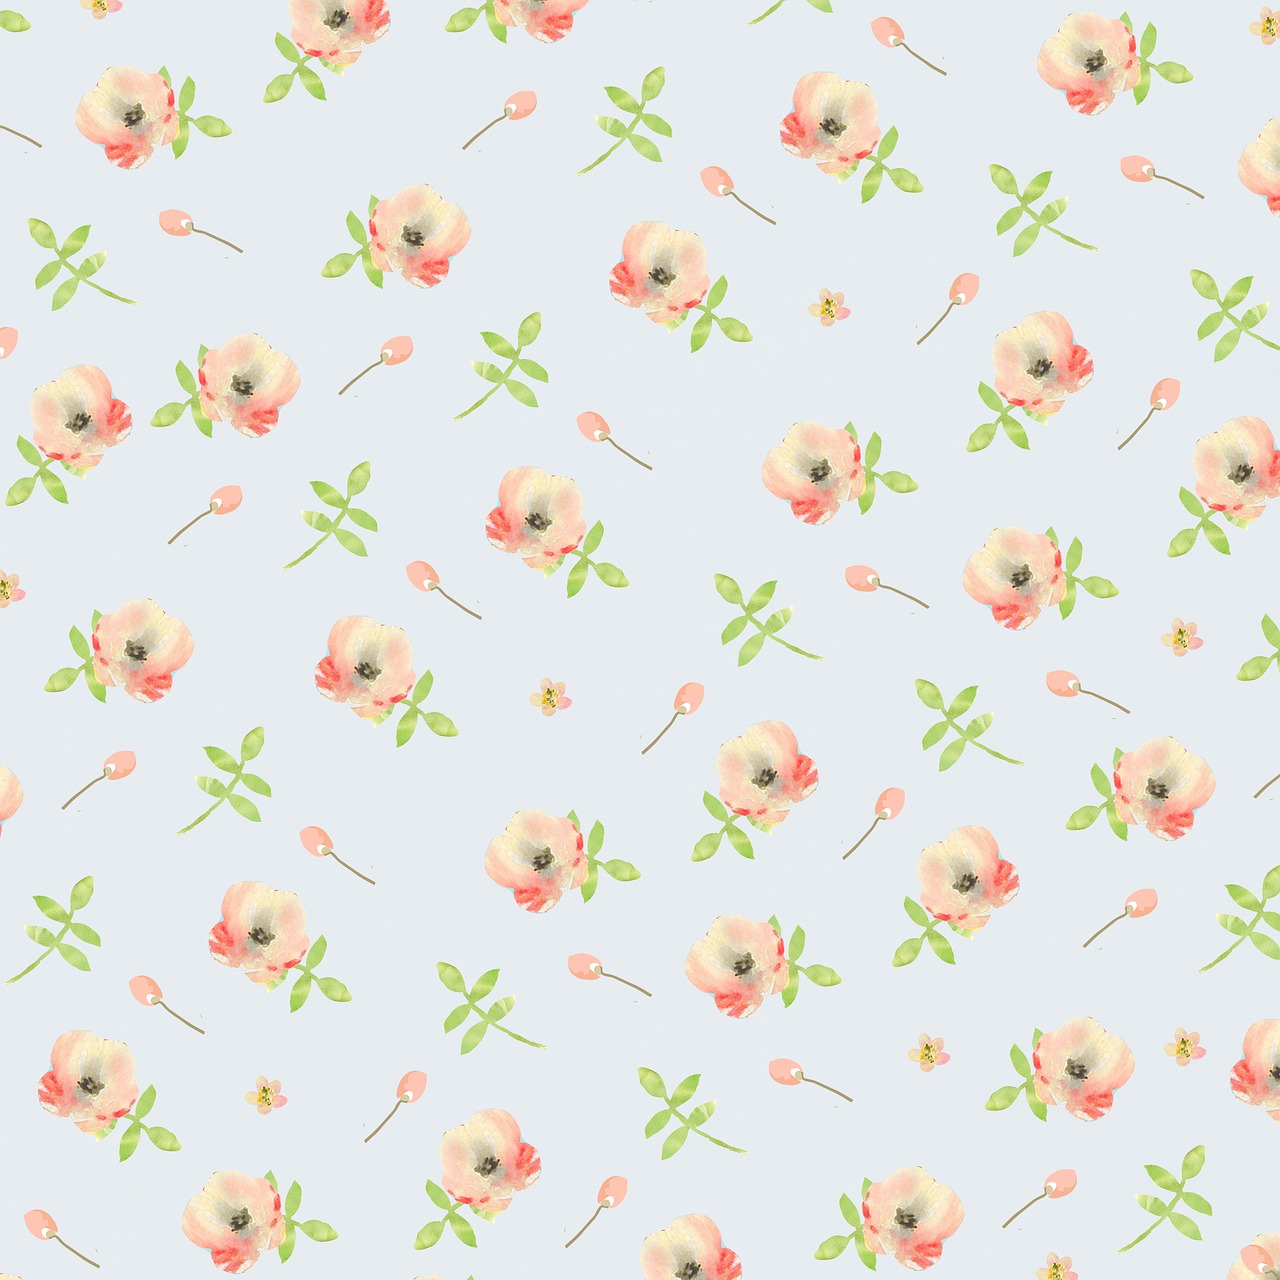 floral background floral paper floral pattern free photo